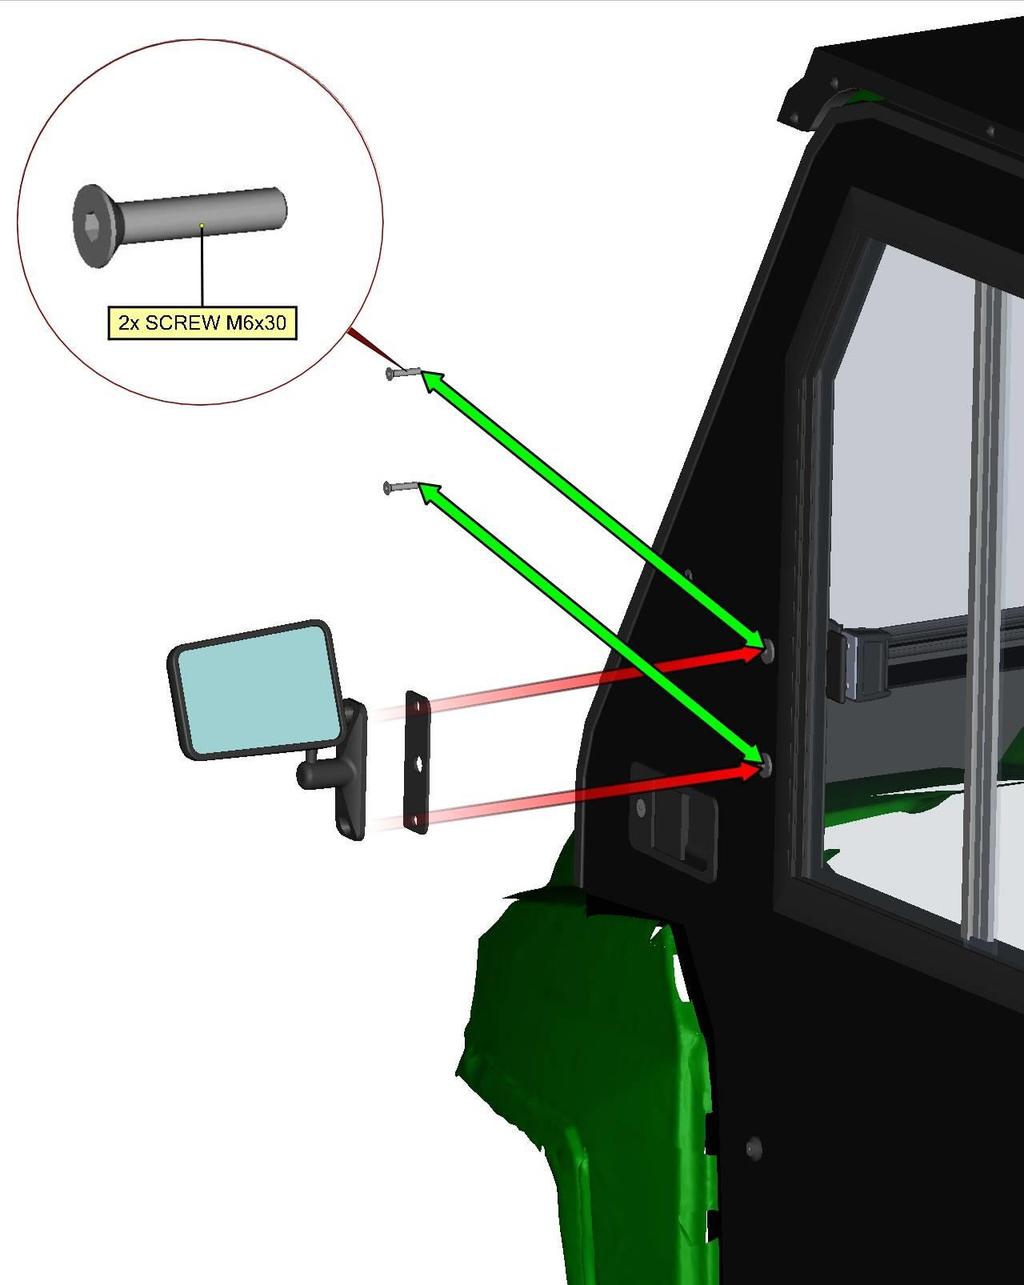 Take out the screws from the door (blue arrows) and place the rear mirror and the mirror washer onto the door